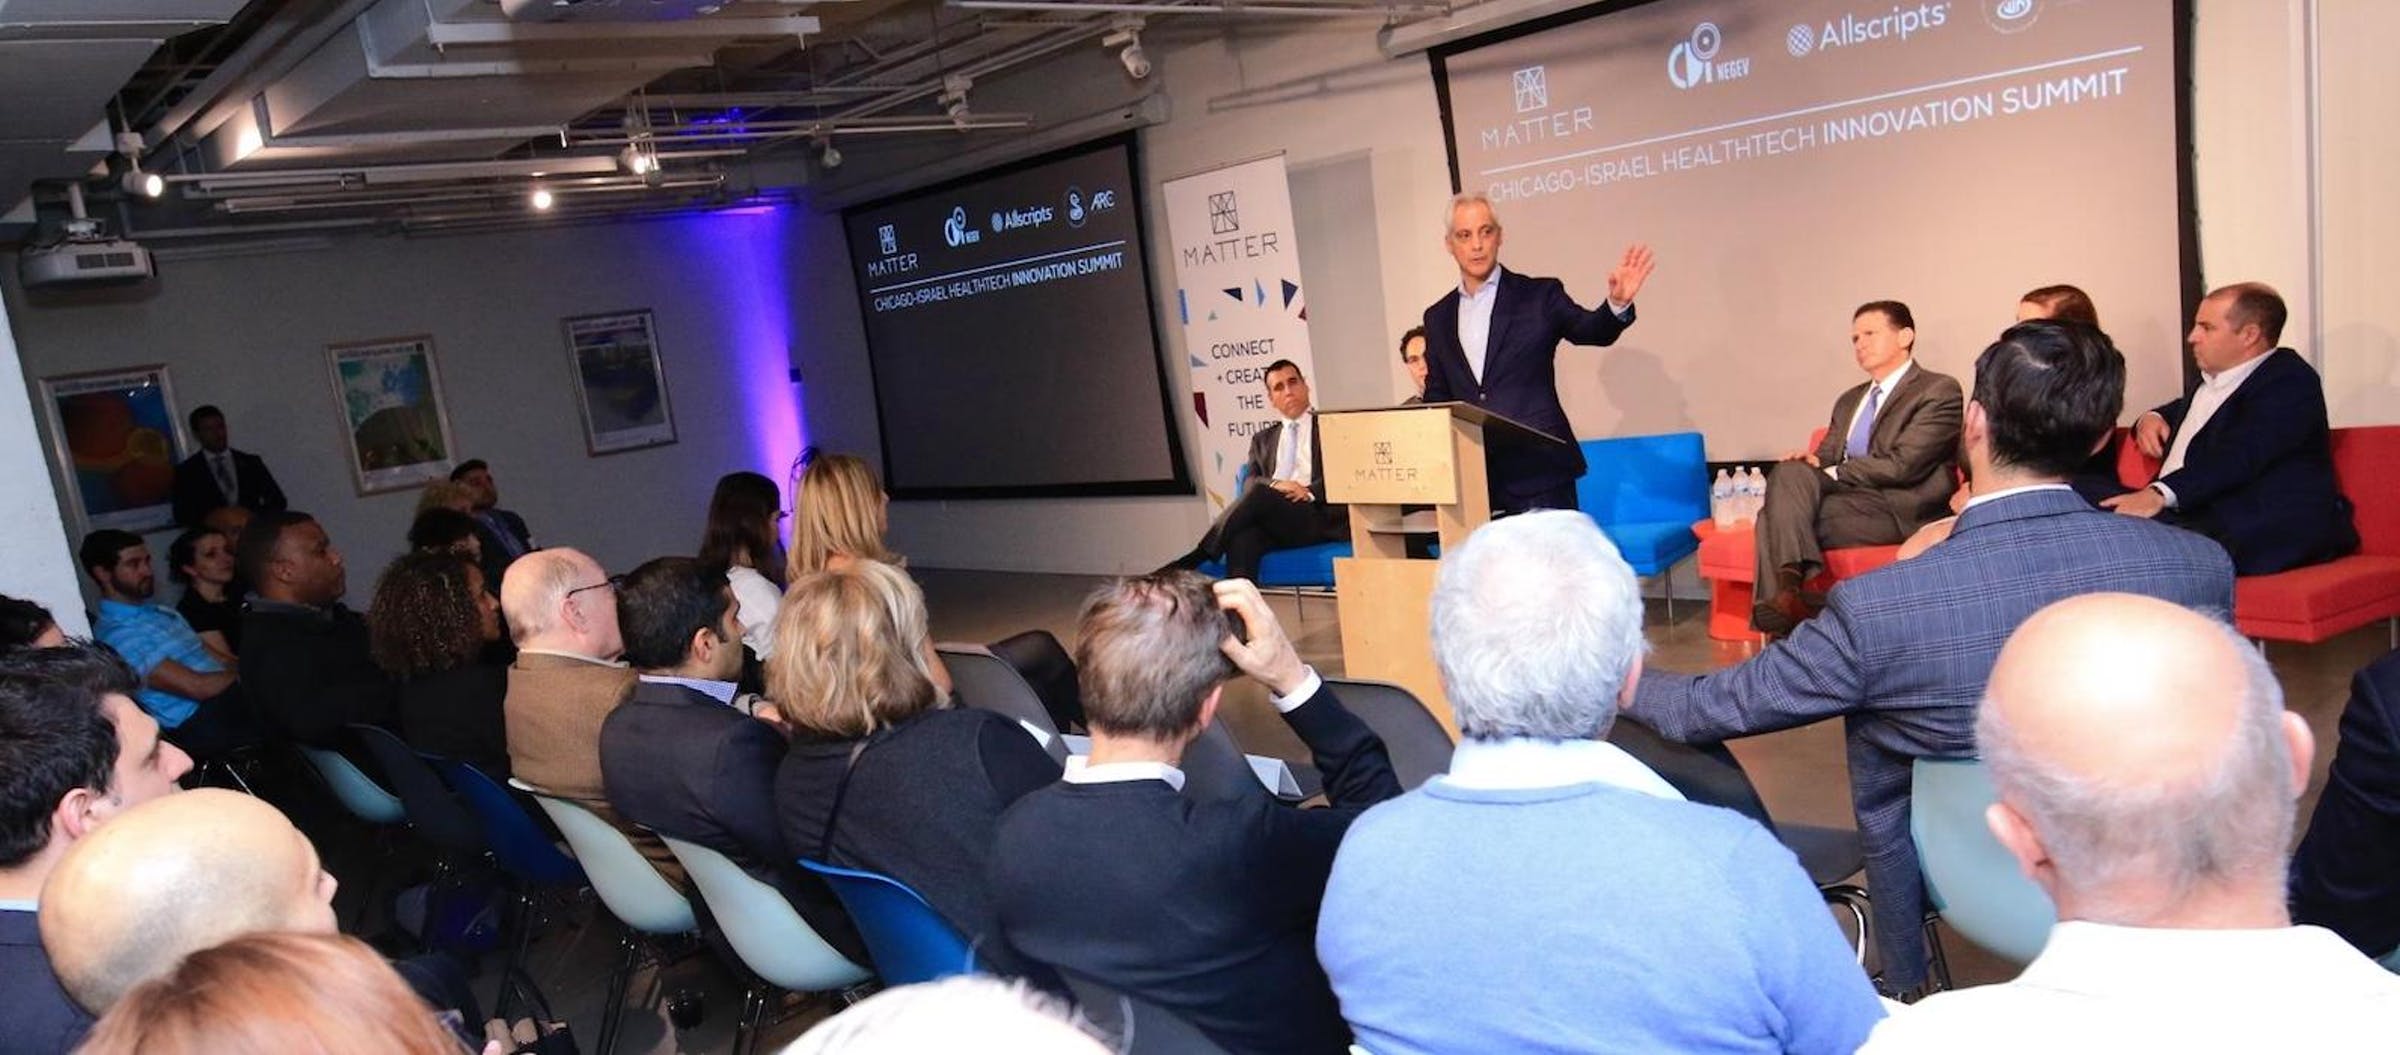 Lessons from the Chicago-Israel Health Tech Summit